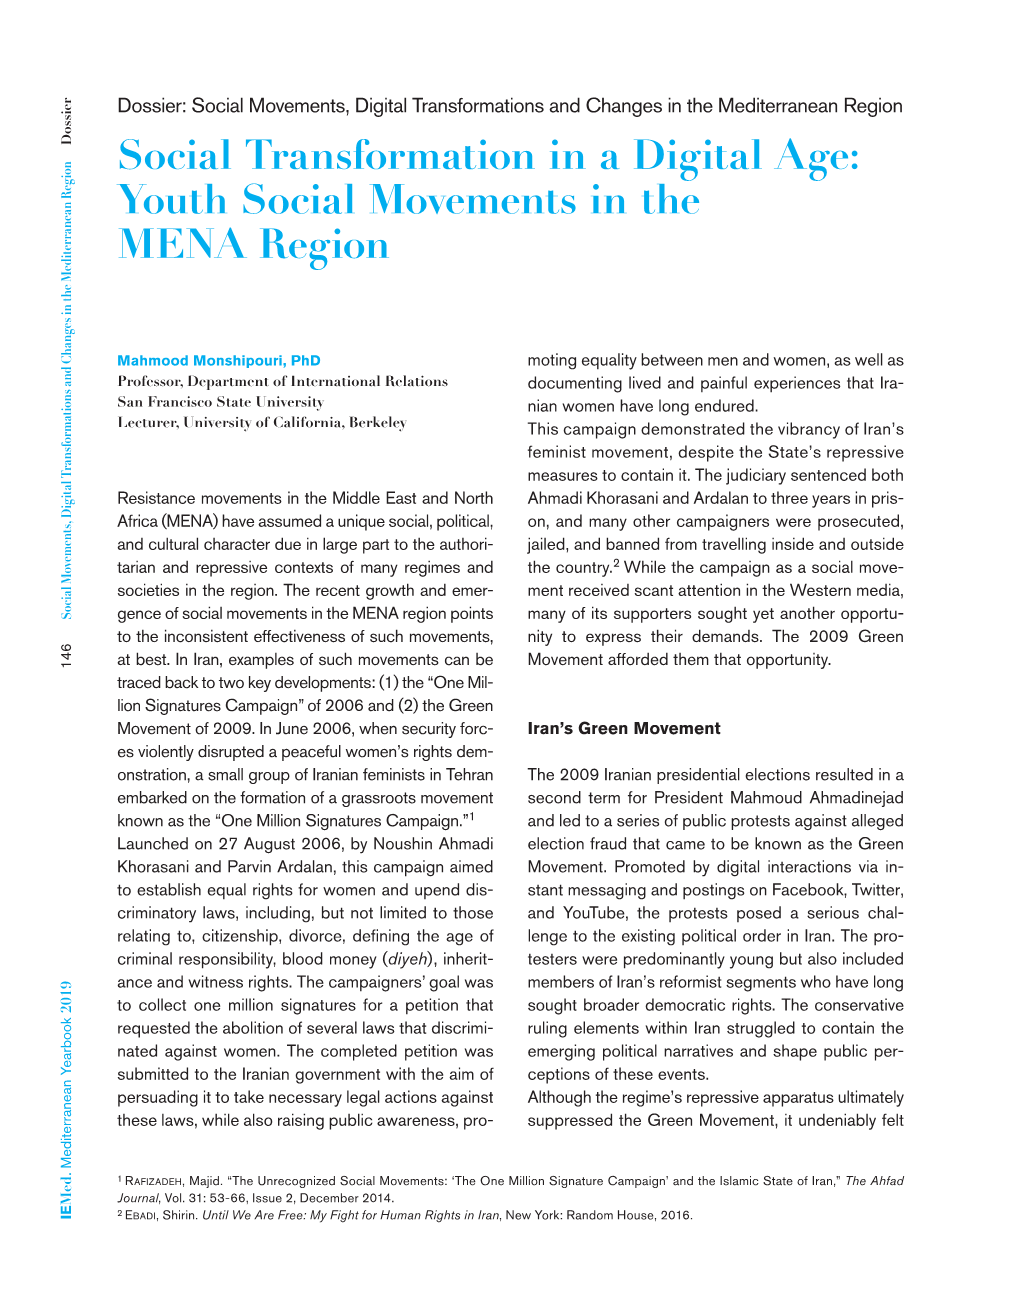 Youth Social Movements in the MENA Region